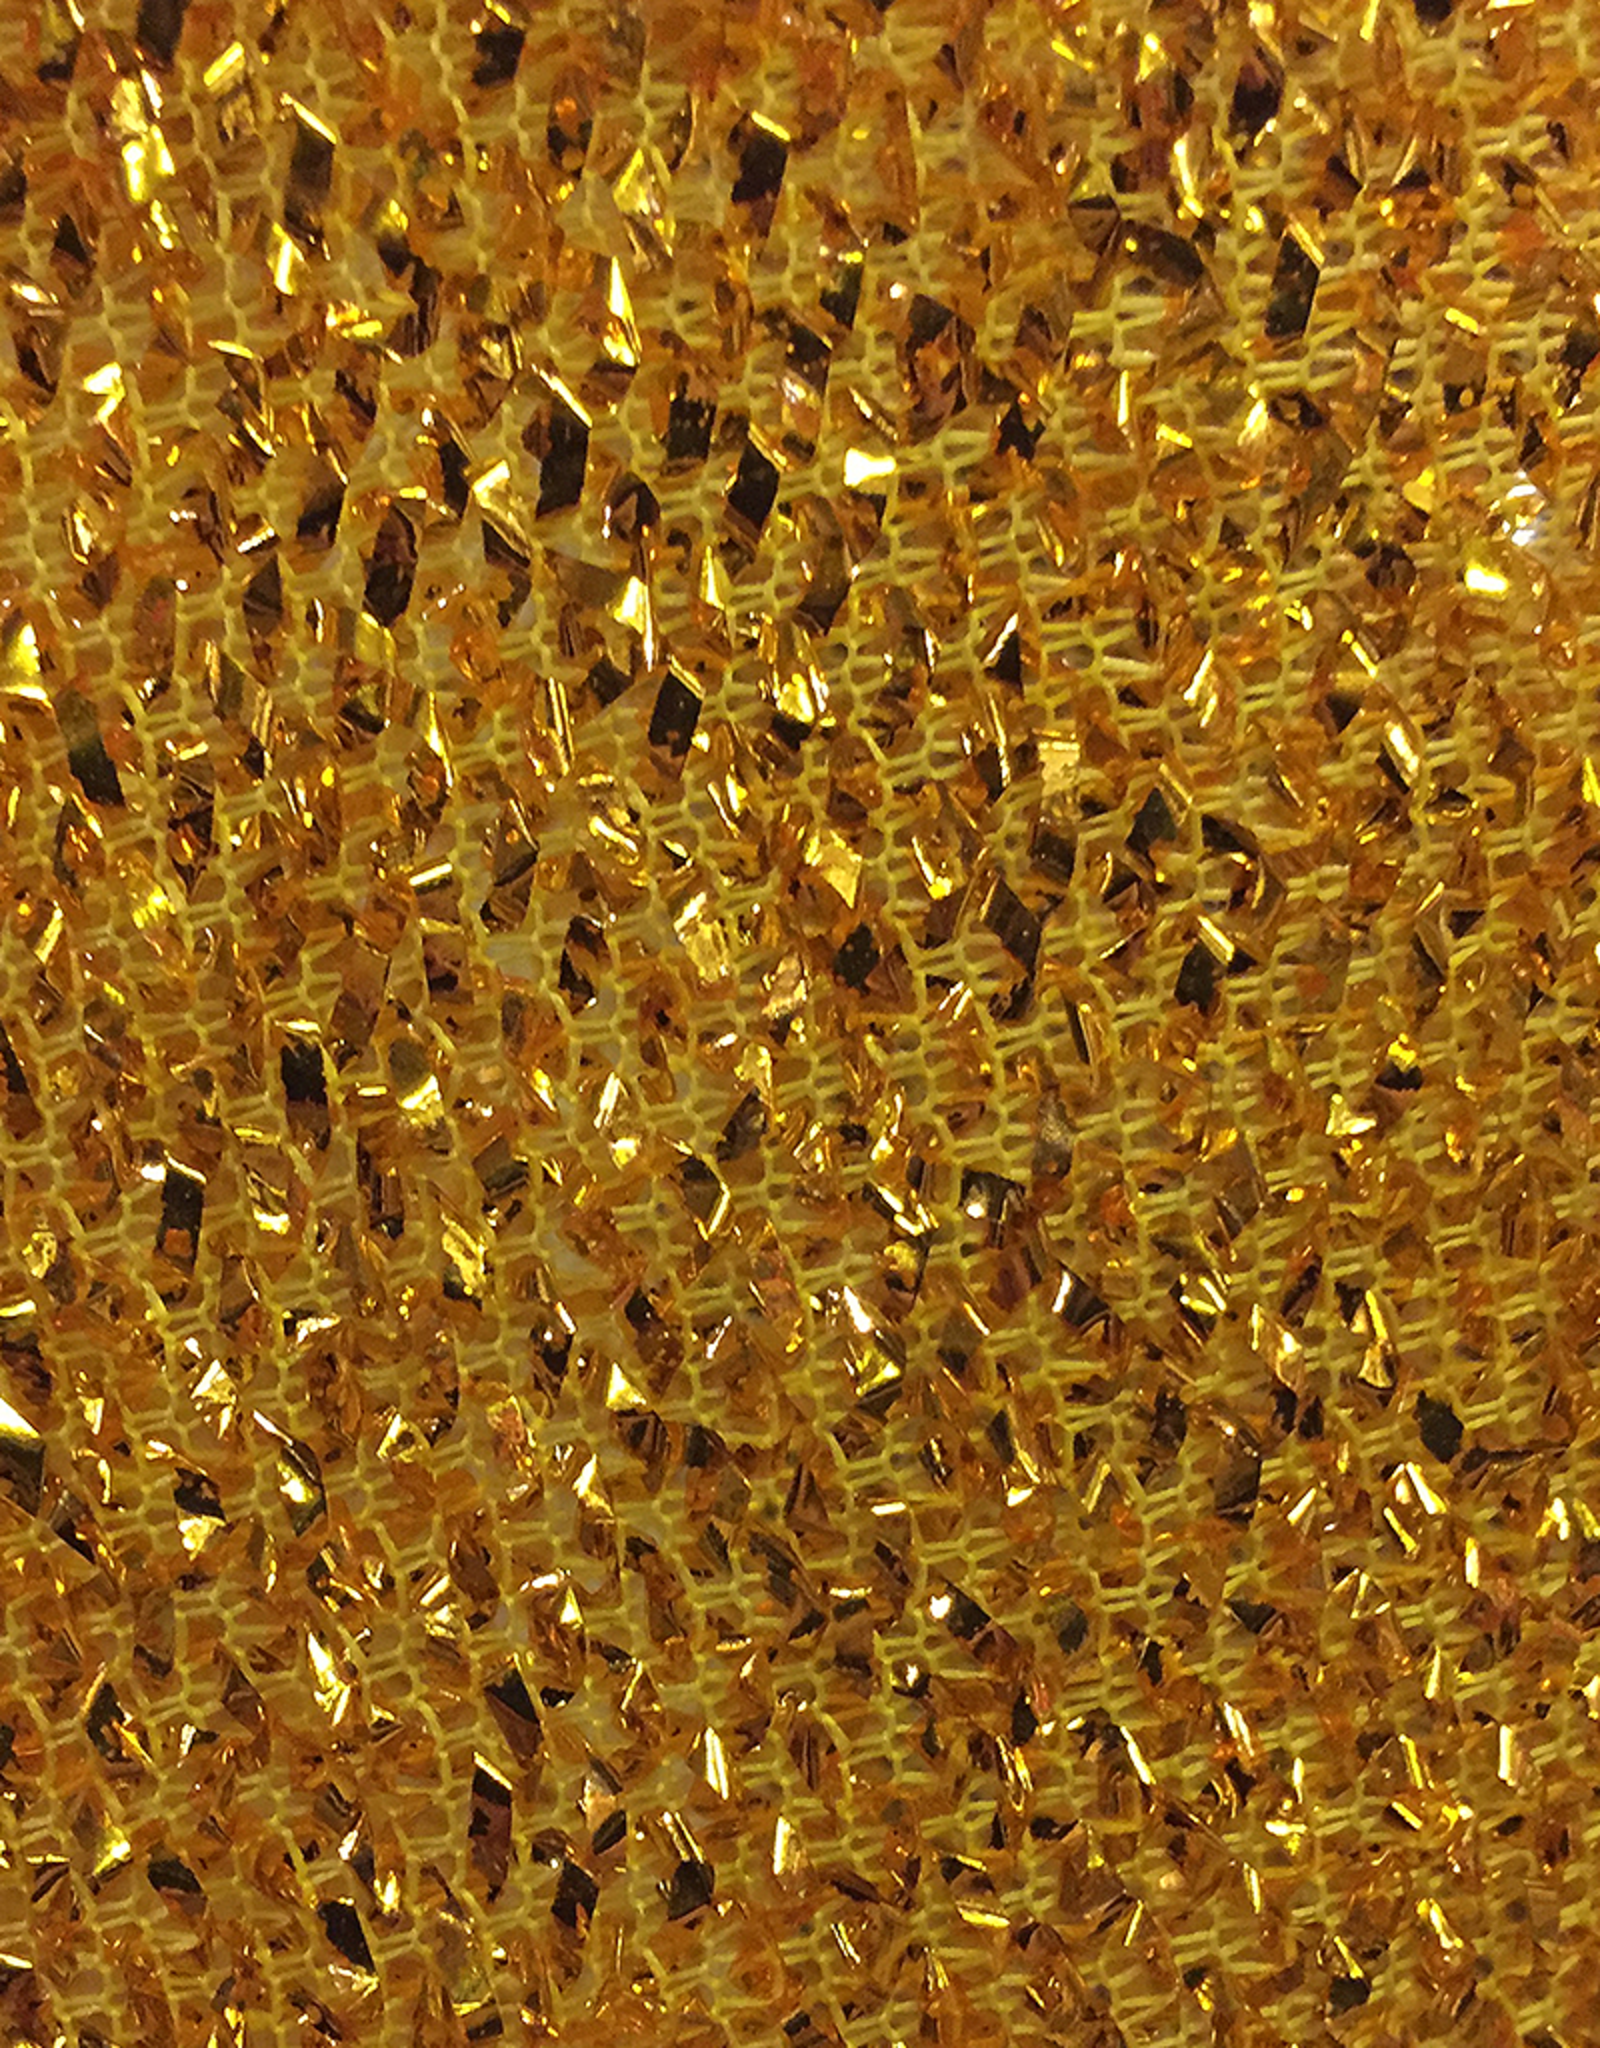 Gold Fabric Shimmering Bow LG 13x18